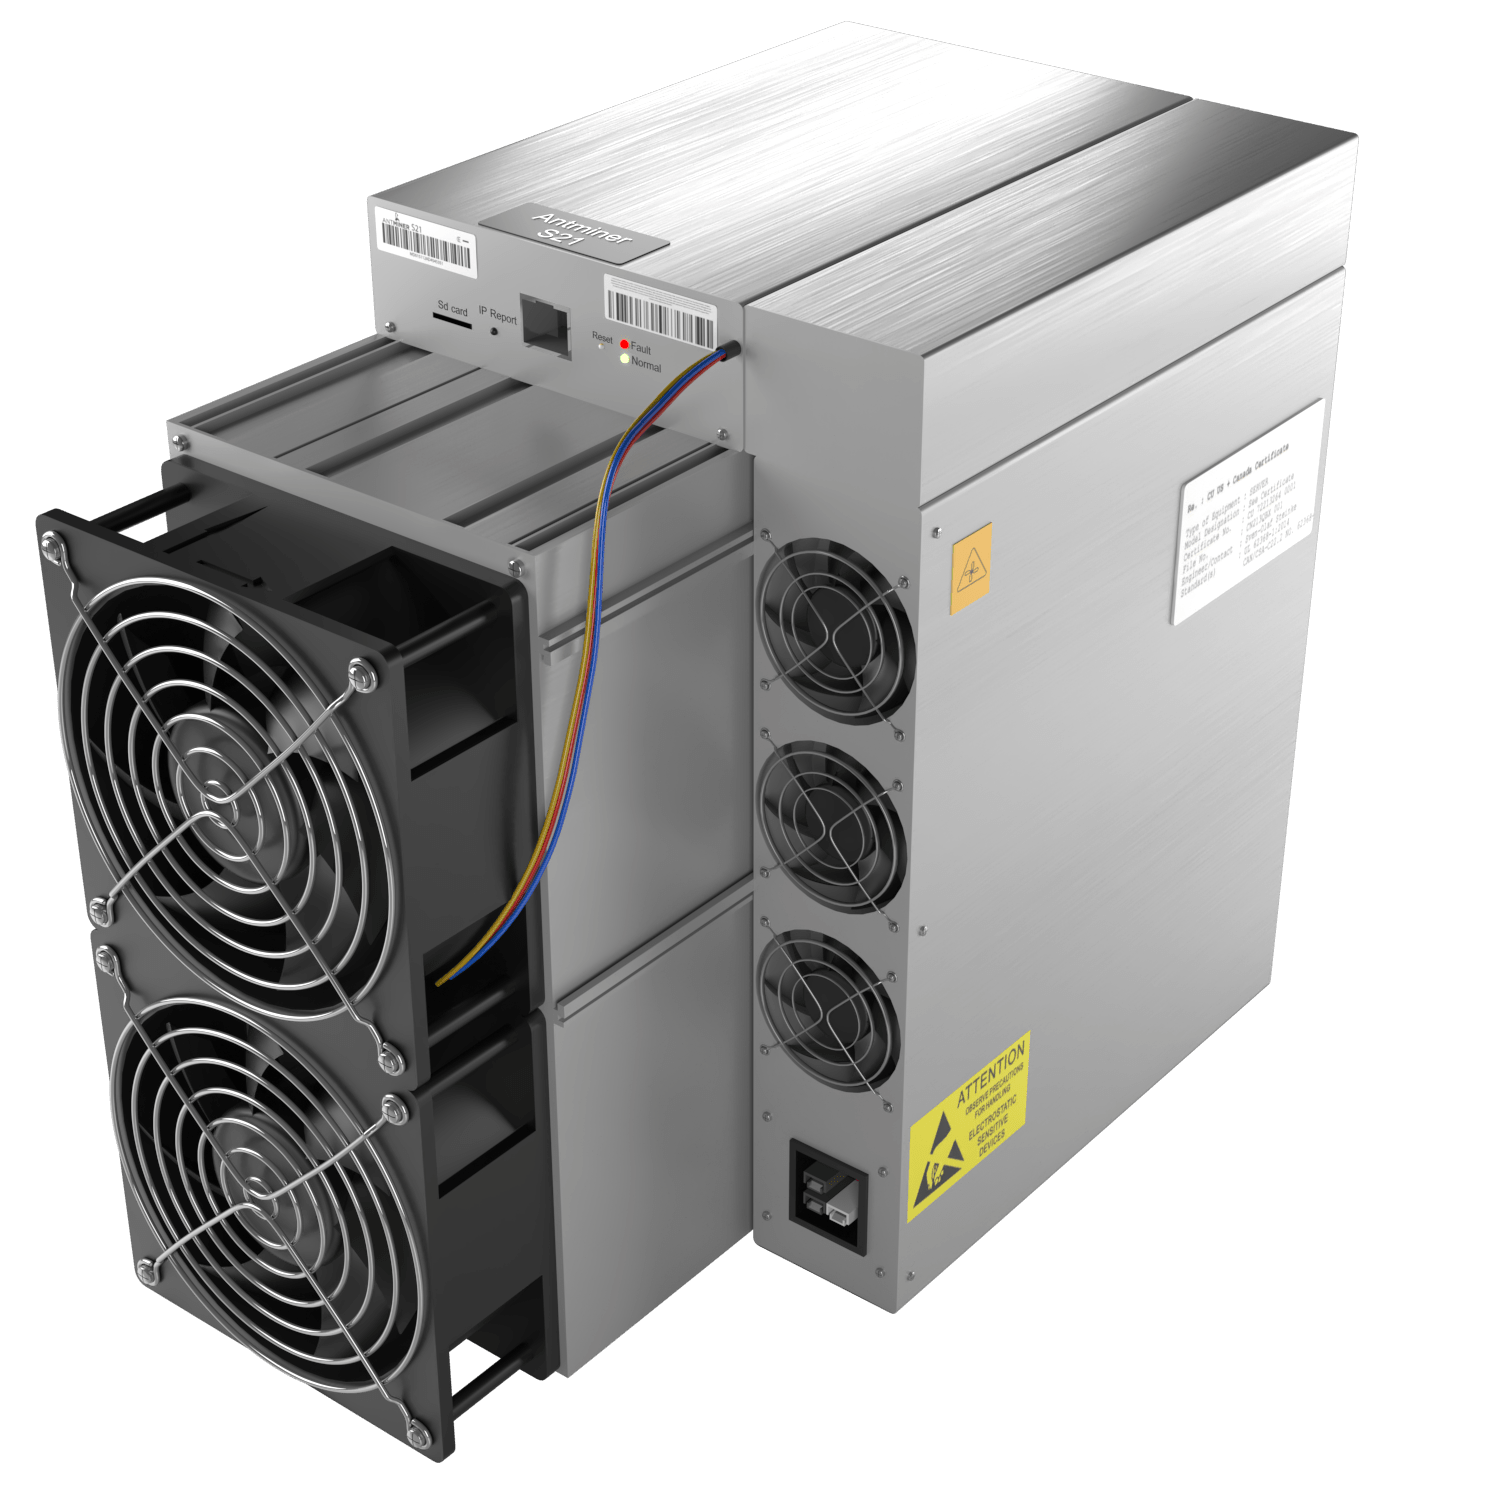 Bitmain Antminer AL1 (15.6Th/s)  Realtime Profit, Specs & Cost | Mining Now